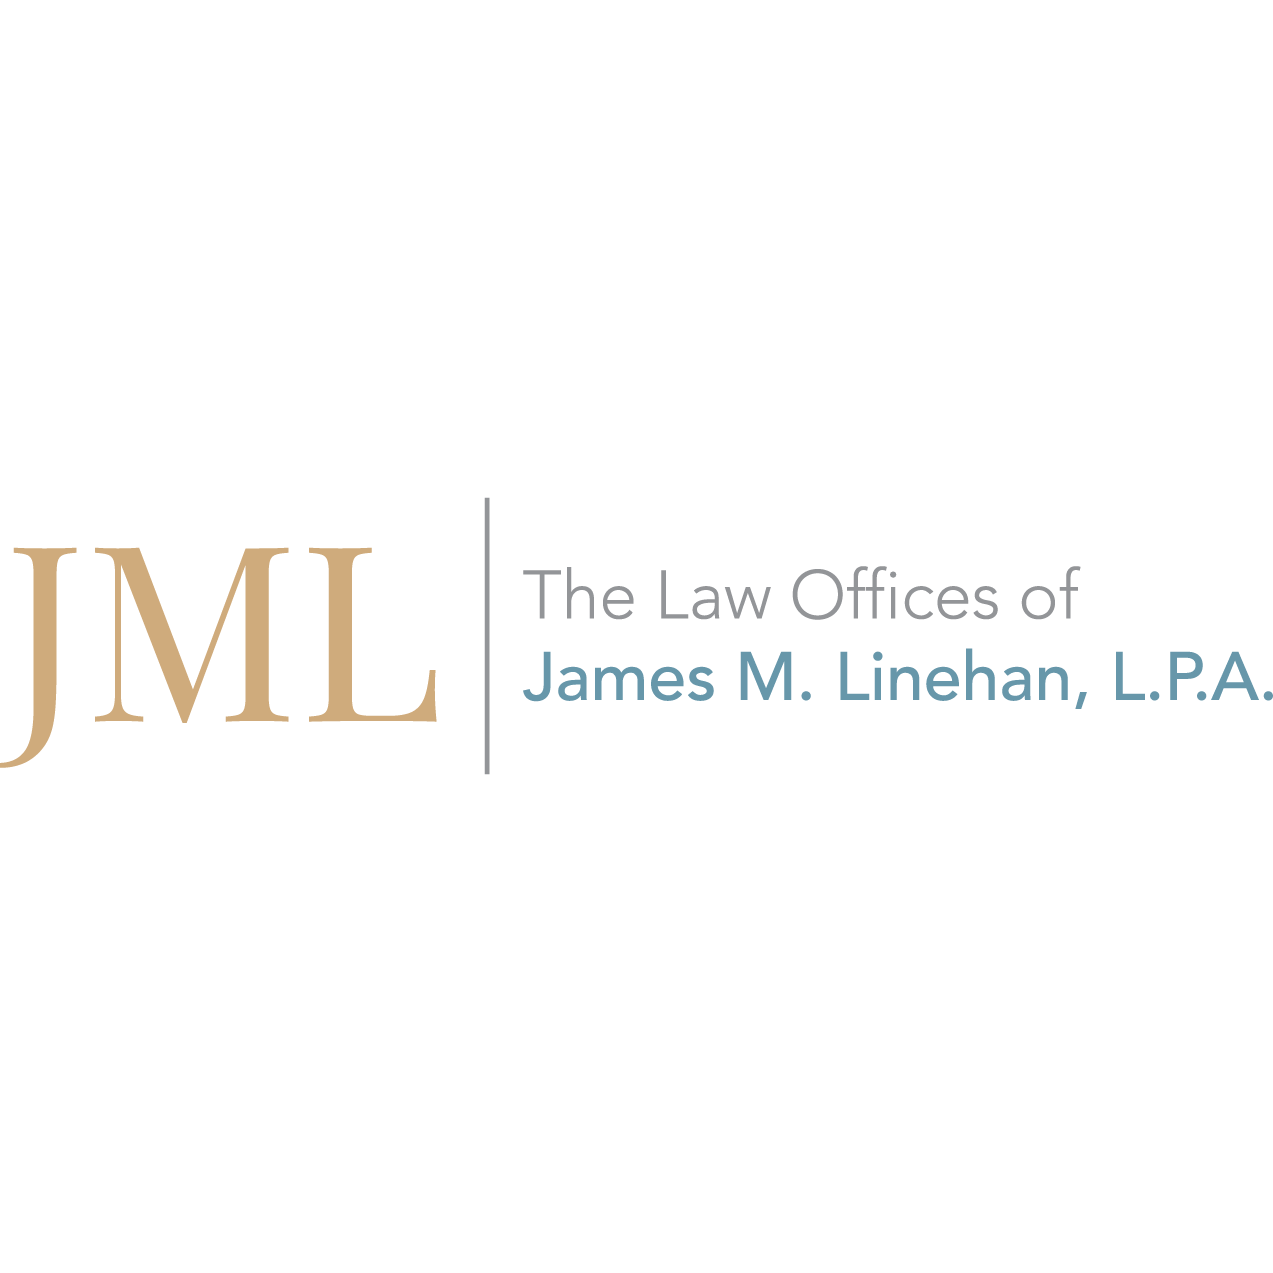 The Law Offices of James M. Linehan, LPA